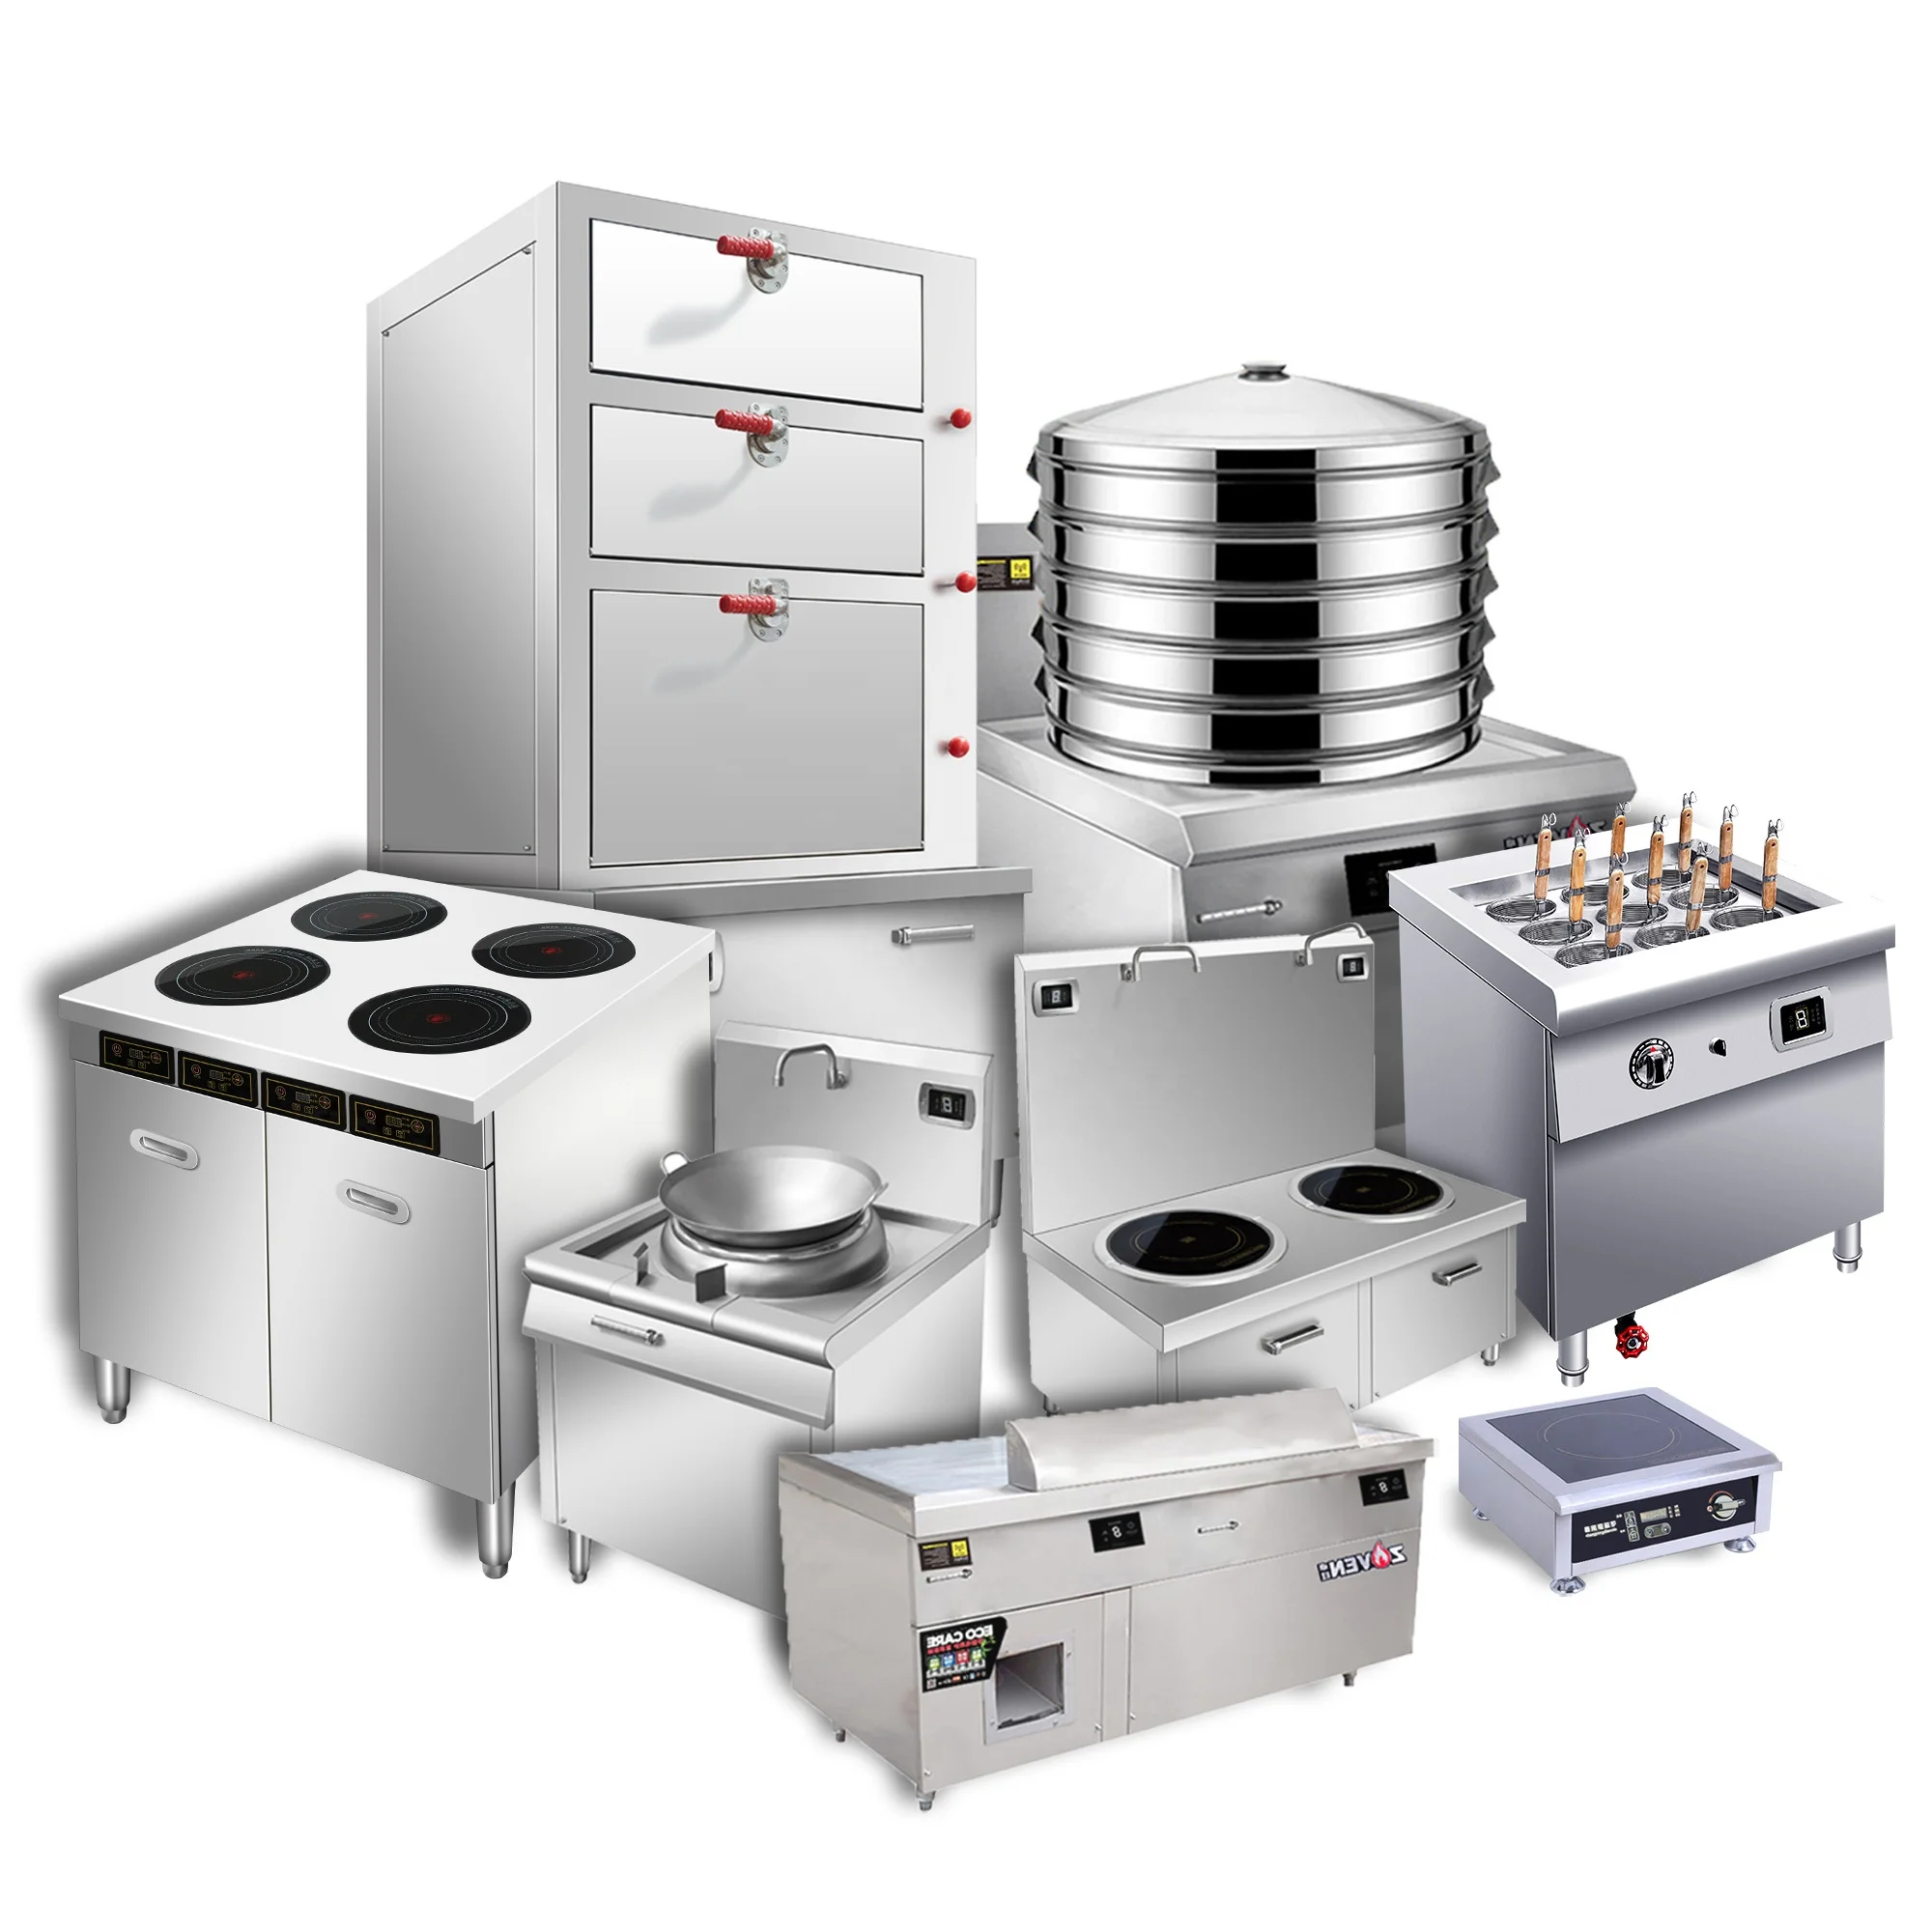 Stainless Steel Heavy Duty Hotel Commerical Used Restaurant Catering Professional Kitchen Equipment Buy Professional Kitchen Equipment